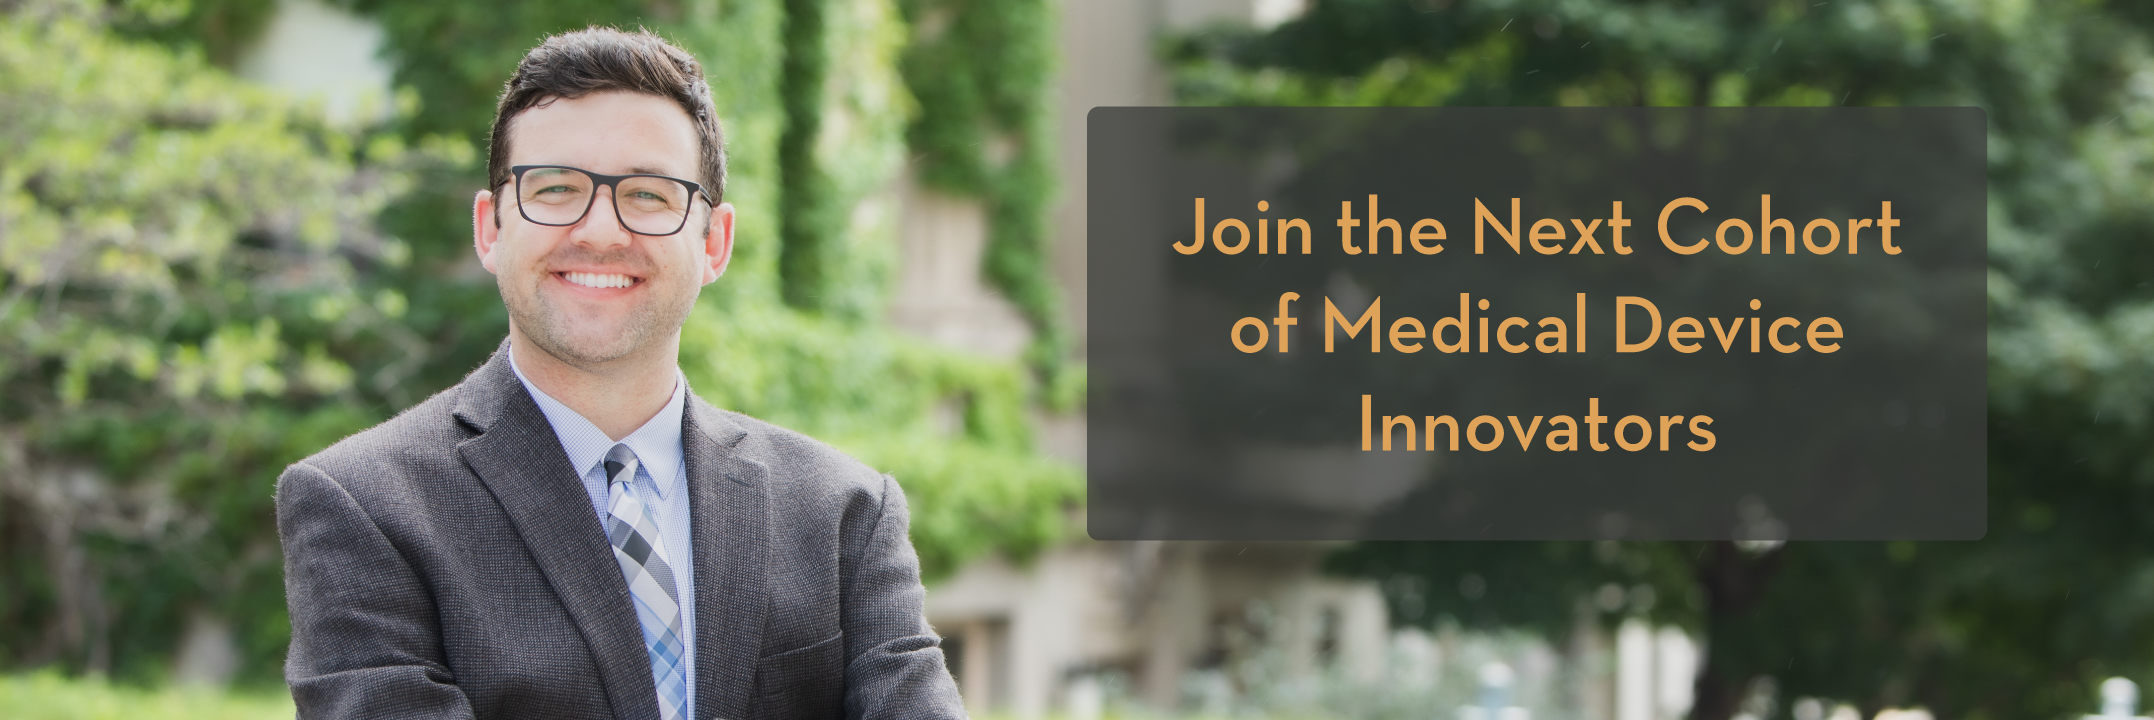 MDI student outdoors and smiling with green foliage in the background. Overlay text reads "Join the next cohort of medical device innovators."